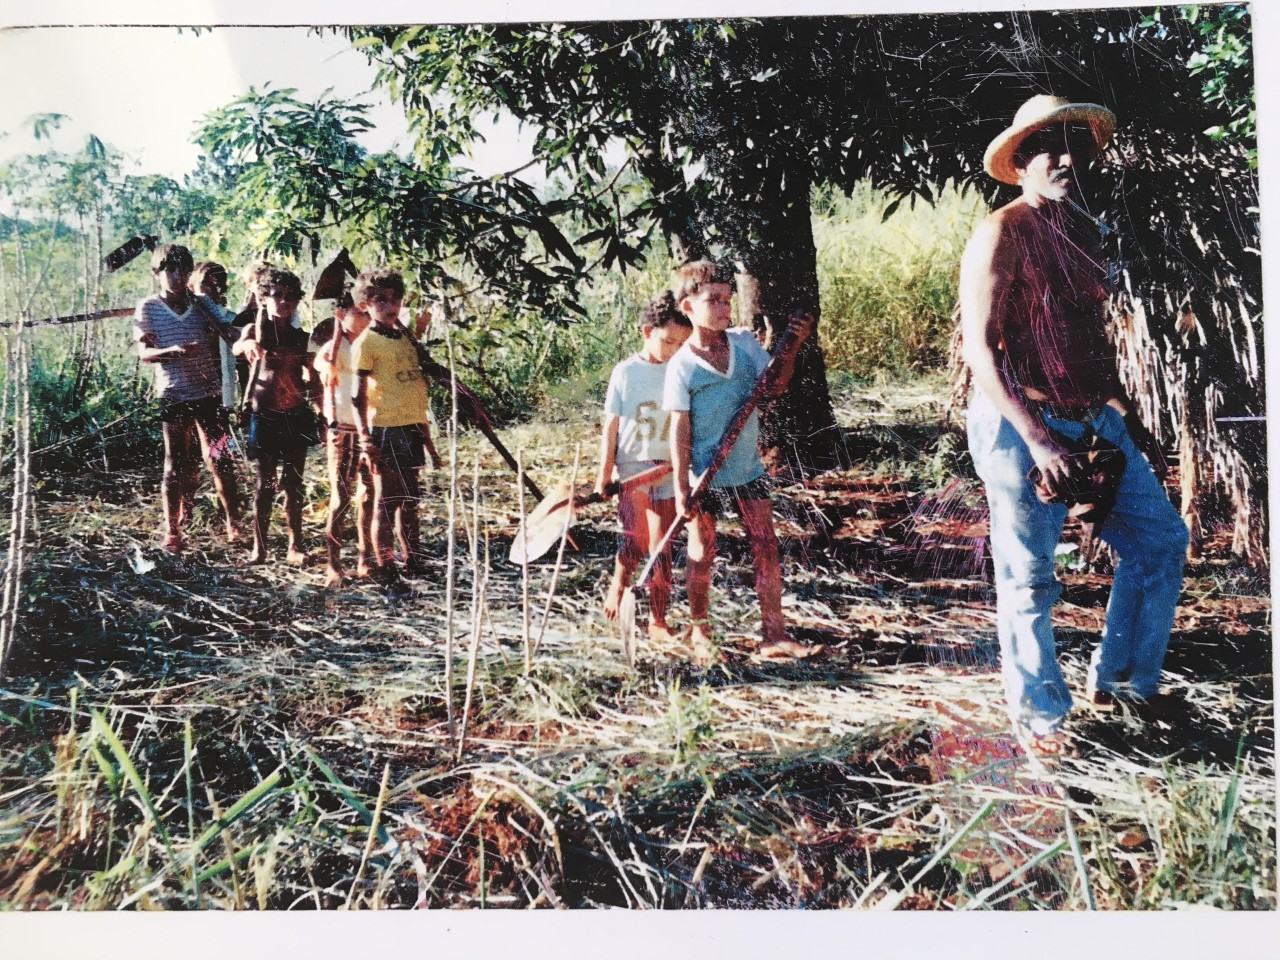 Weller at his Grandfather's Coffee Plantation in Brazil for Storytelling Week